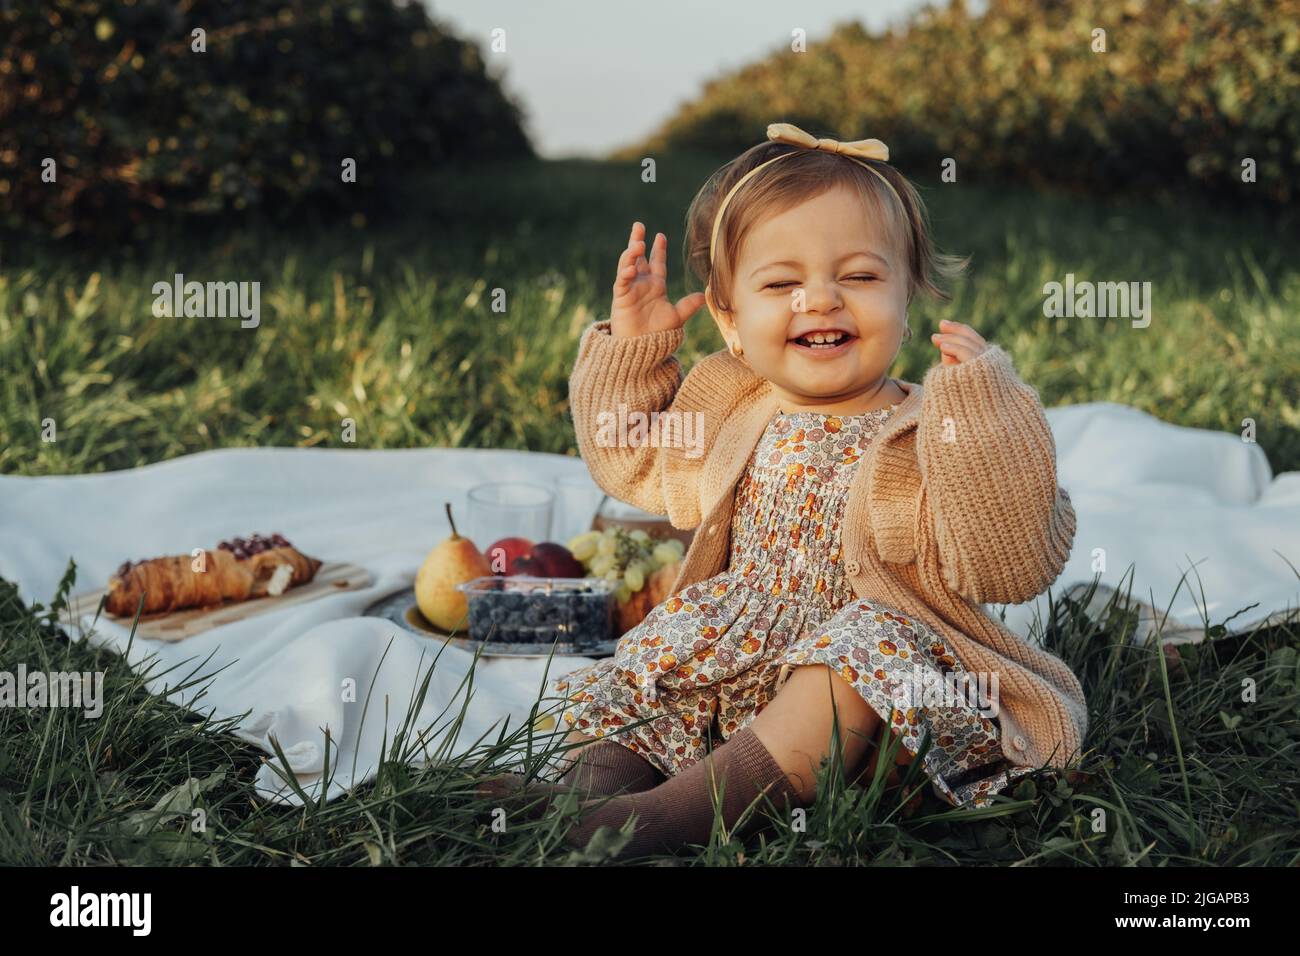 Portrait of Cheerful Little Baby Girl Sitting on a Plaid on Picnic Outdoors at Sunset Stock Photo